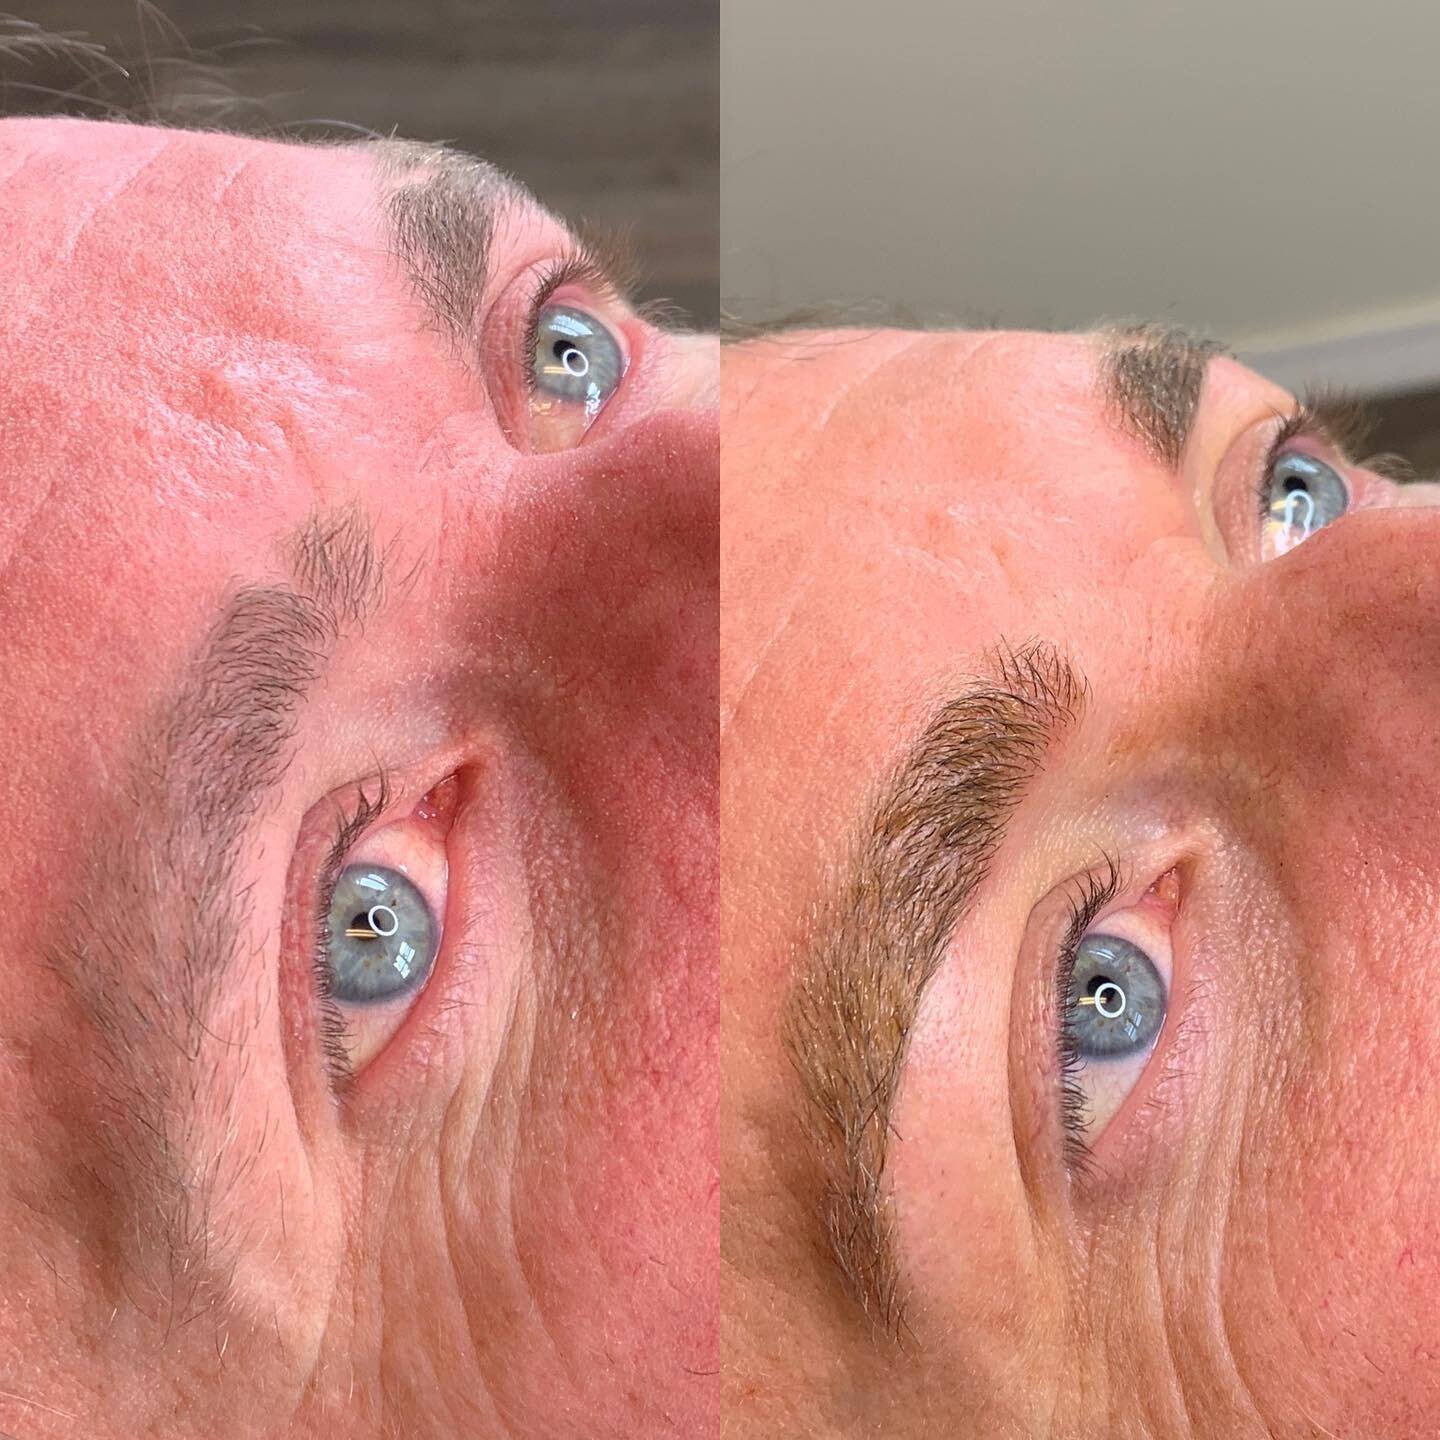 Thank you so much for being my first male Microblading client!🔥
Will update with more pics when he is healed ~ after the touch up appointment! ✨